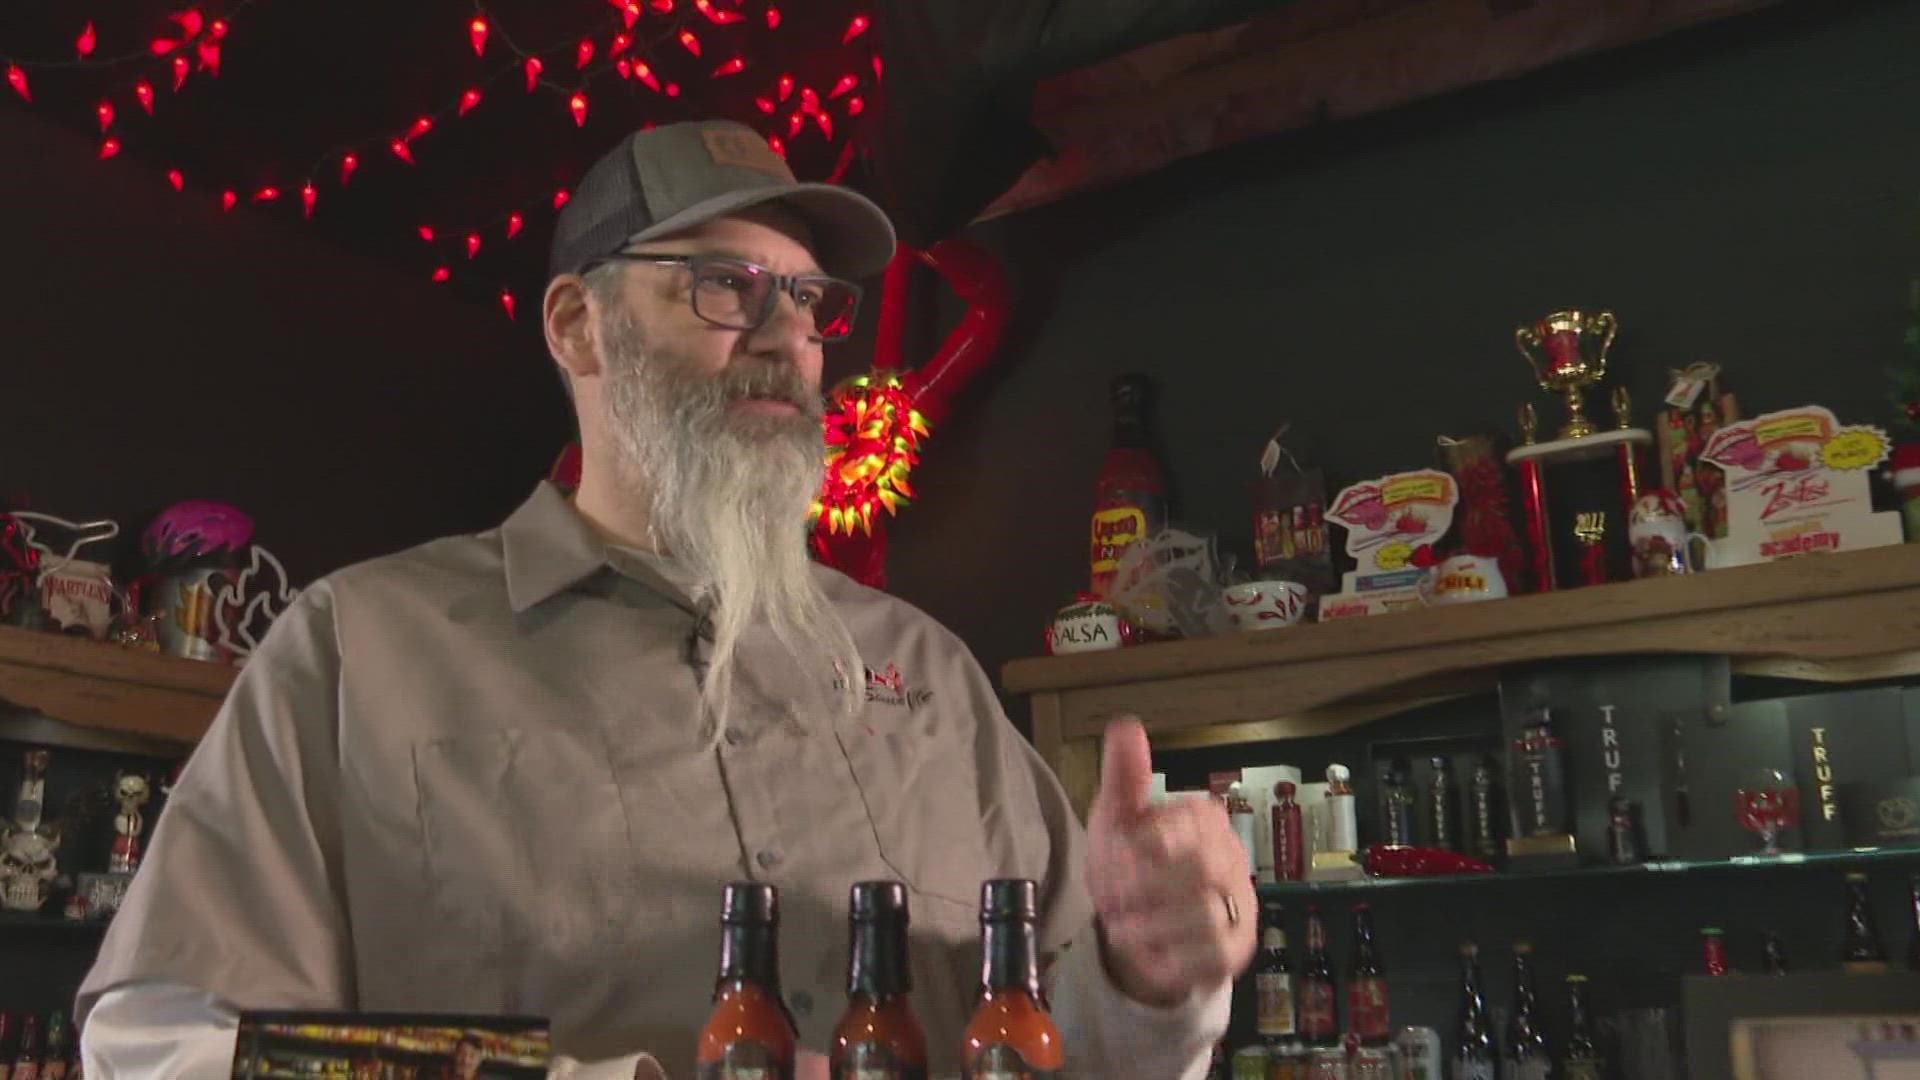 Vic Clinco has 11,000 bottles of hot sauce and counting. The sauces are from all over the world, and Clinco is still adding to his collection in his basement.